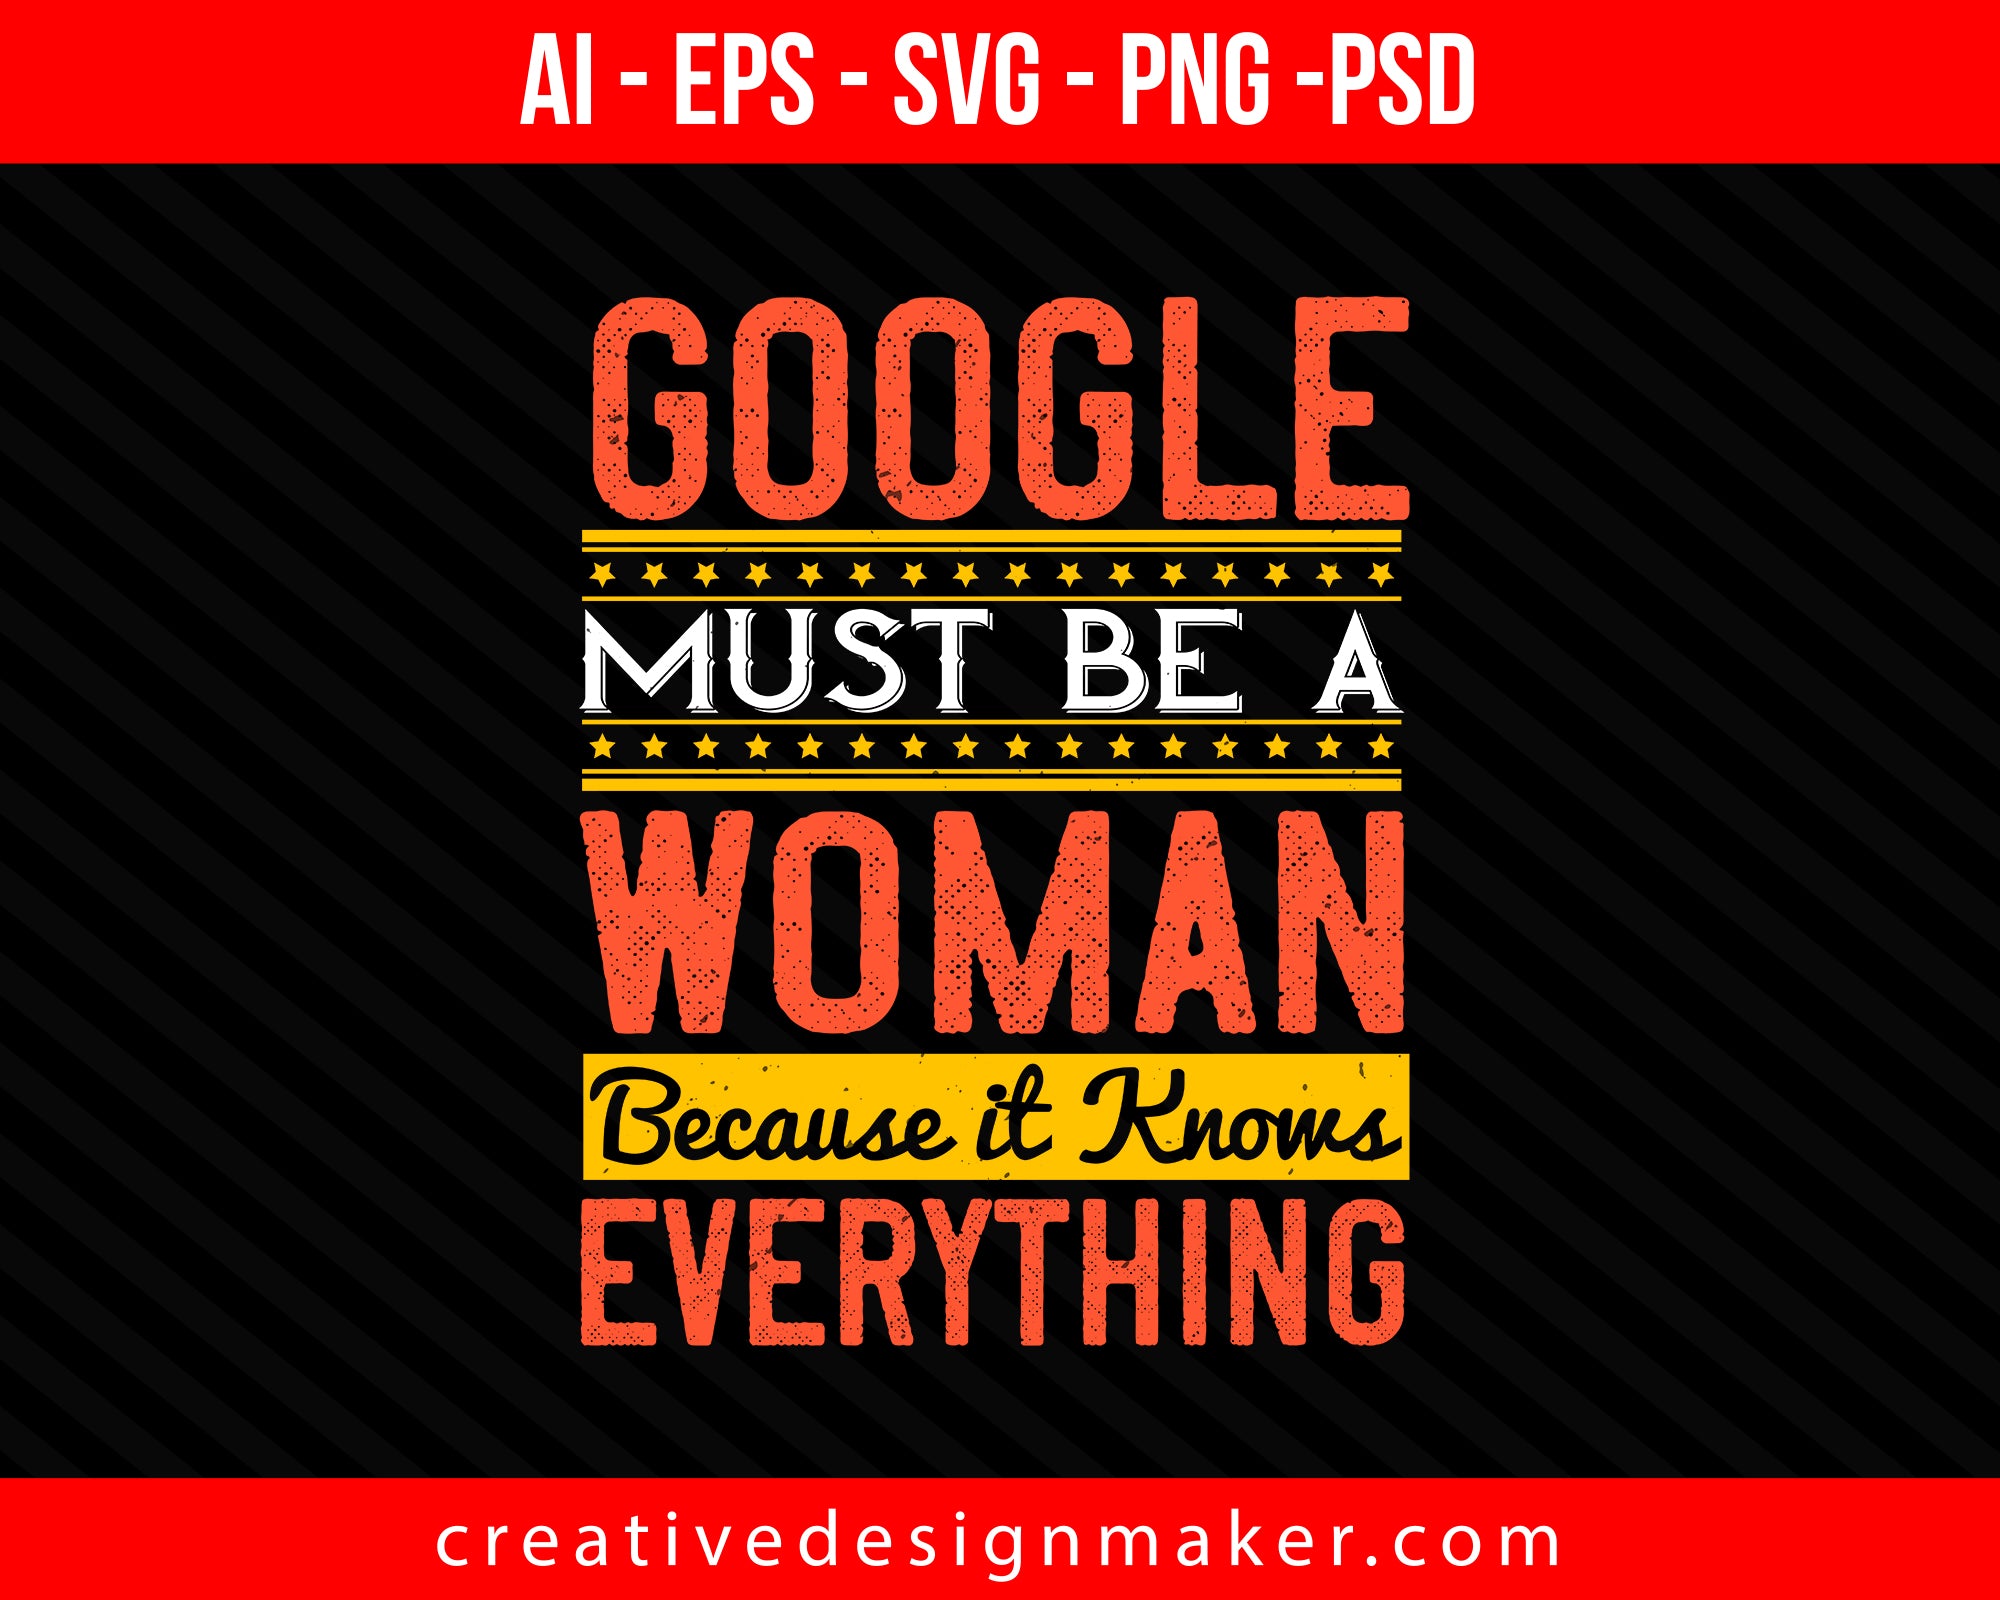 Google must be a woman because it knows everything Internet Print Ready Editable T-Shirt SVG Design!